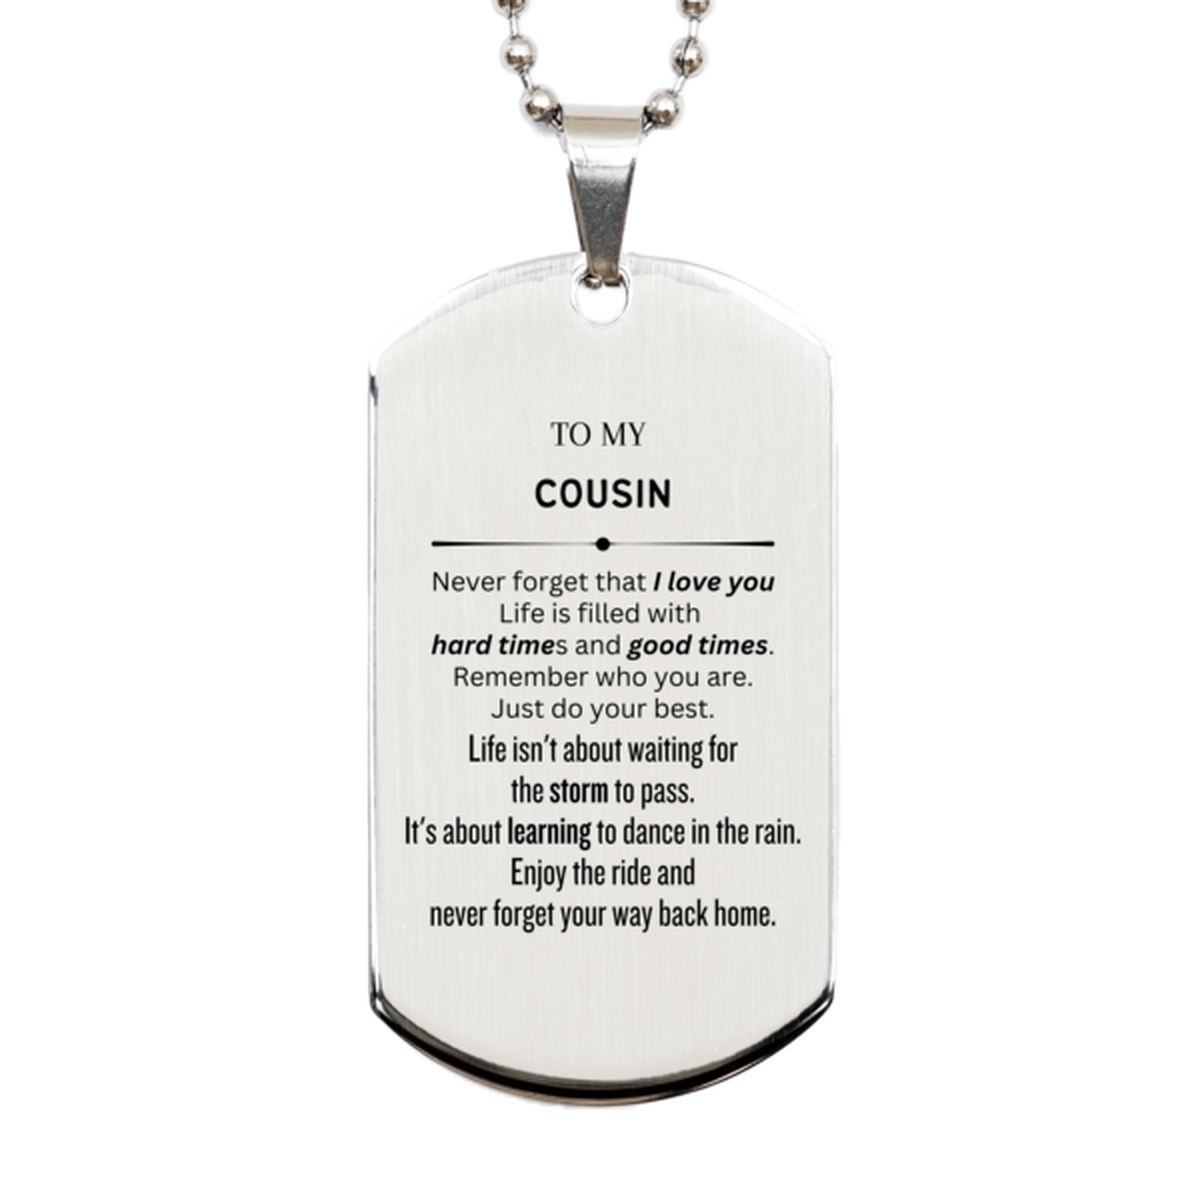 Christmas Cousin Silver Dog Tag Gifts, To My Cousin Birthday Thank You Gifts For Cousin, Graduation Unique Gifts For Cousin To My Cousin Never forget that I love you life is filled with hard times and good times. Remember who you are. Just do your best